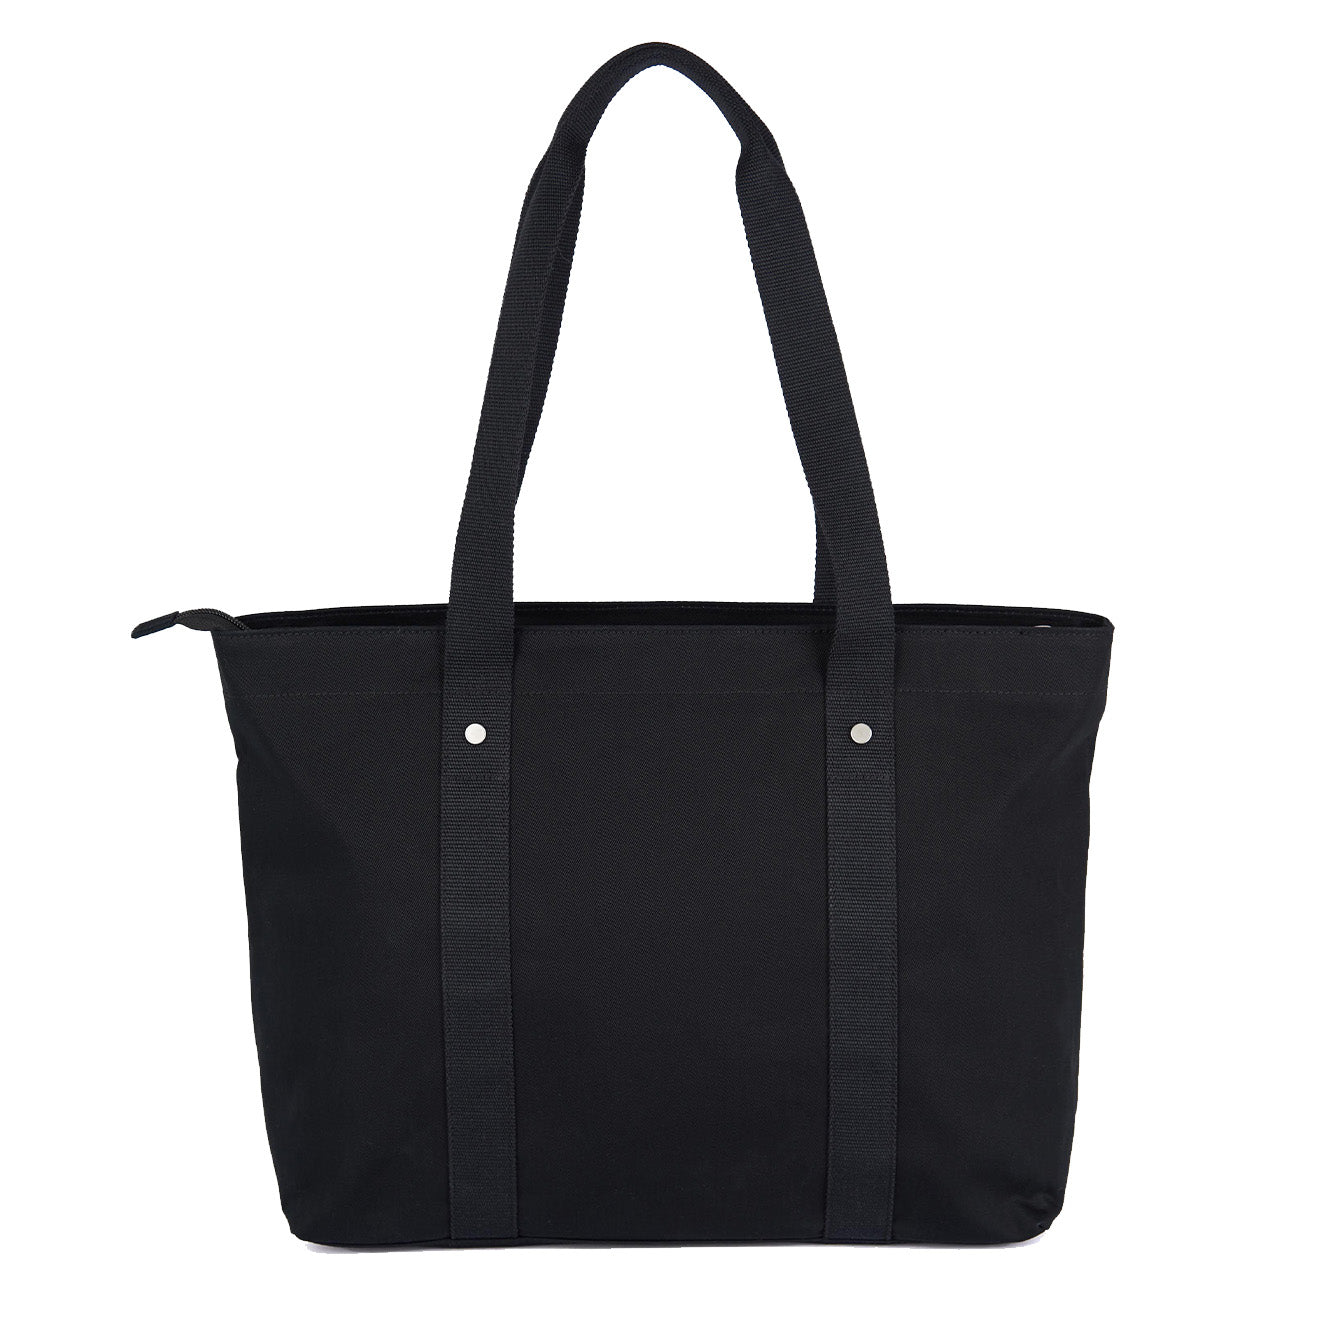 Barbour Womens Olivia Tote Bag Black | The Sporting Lodge